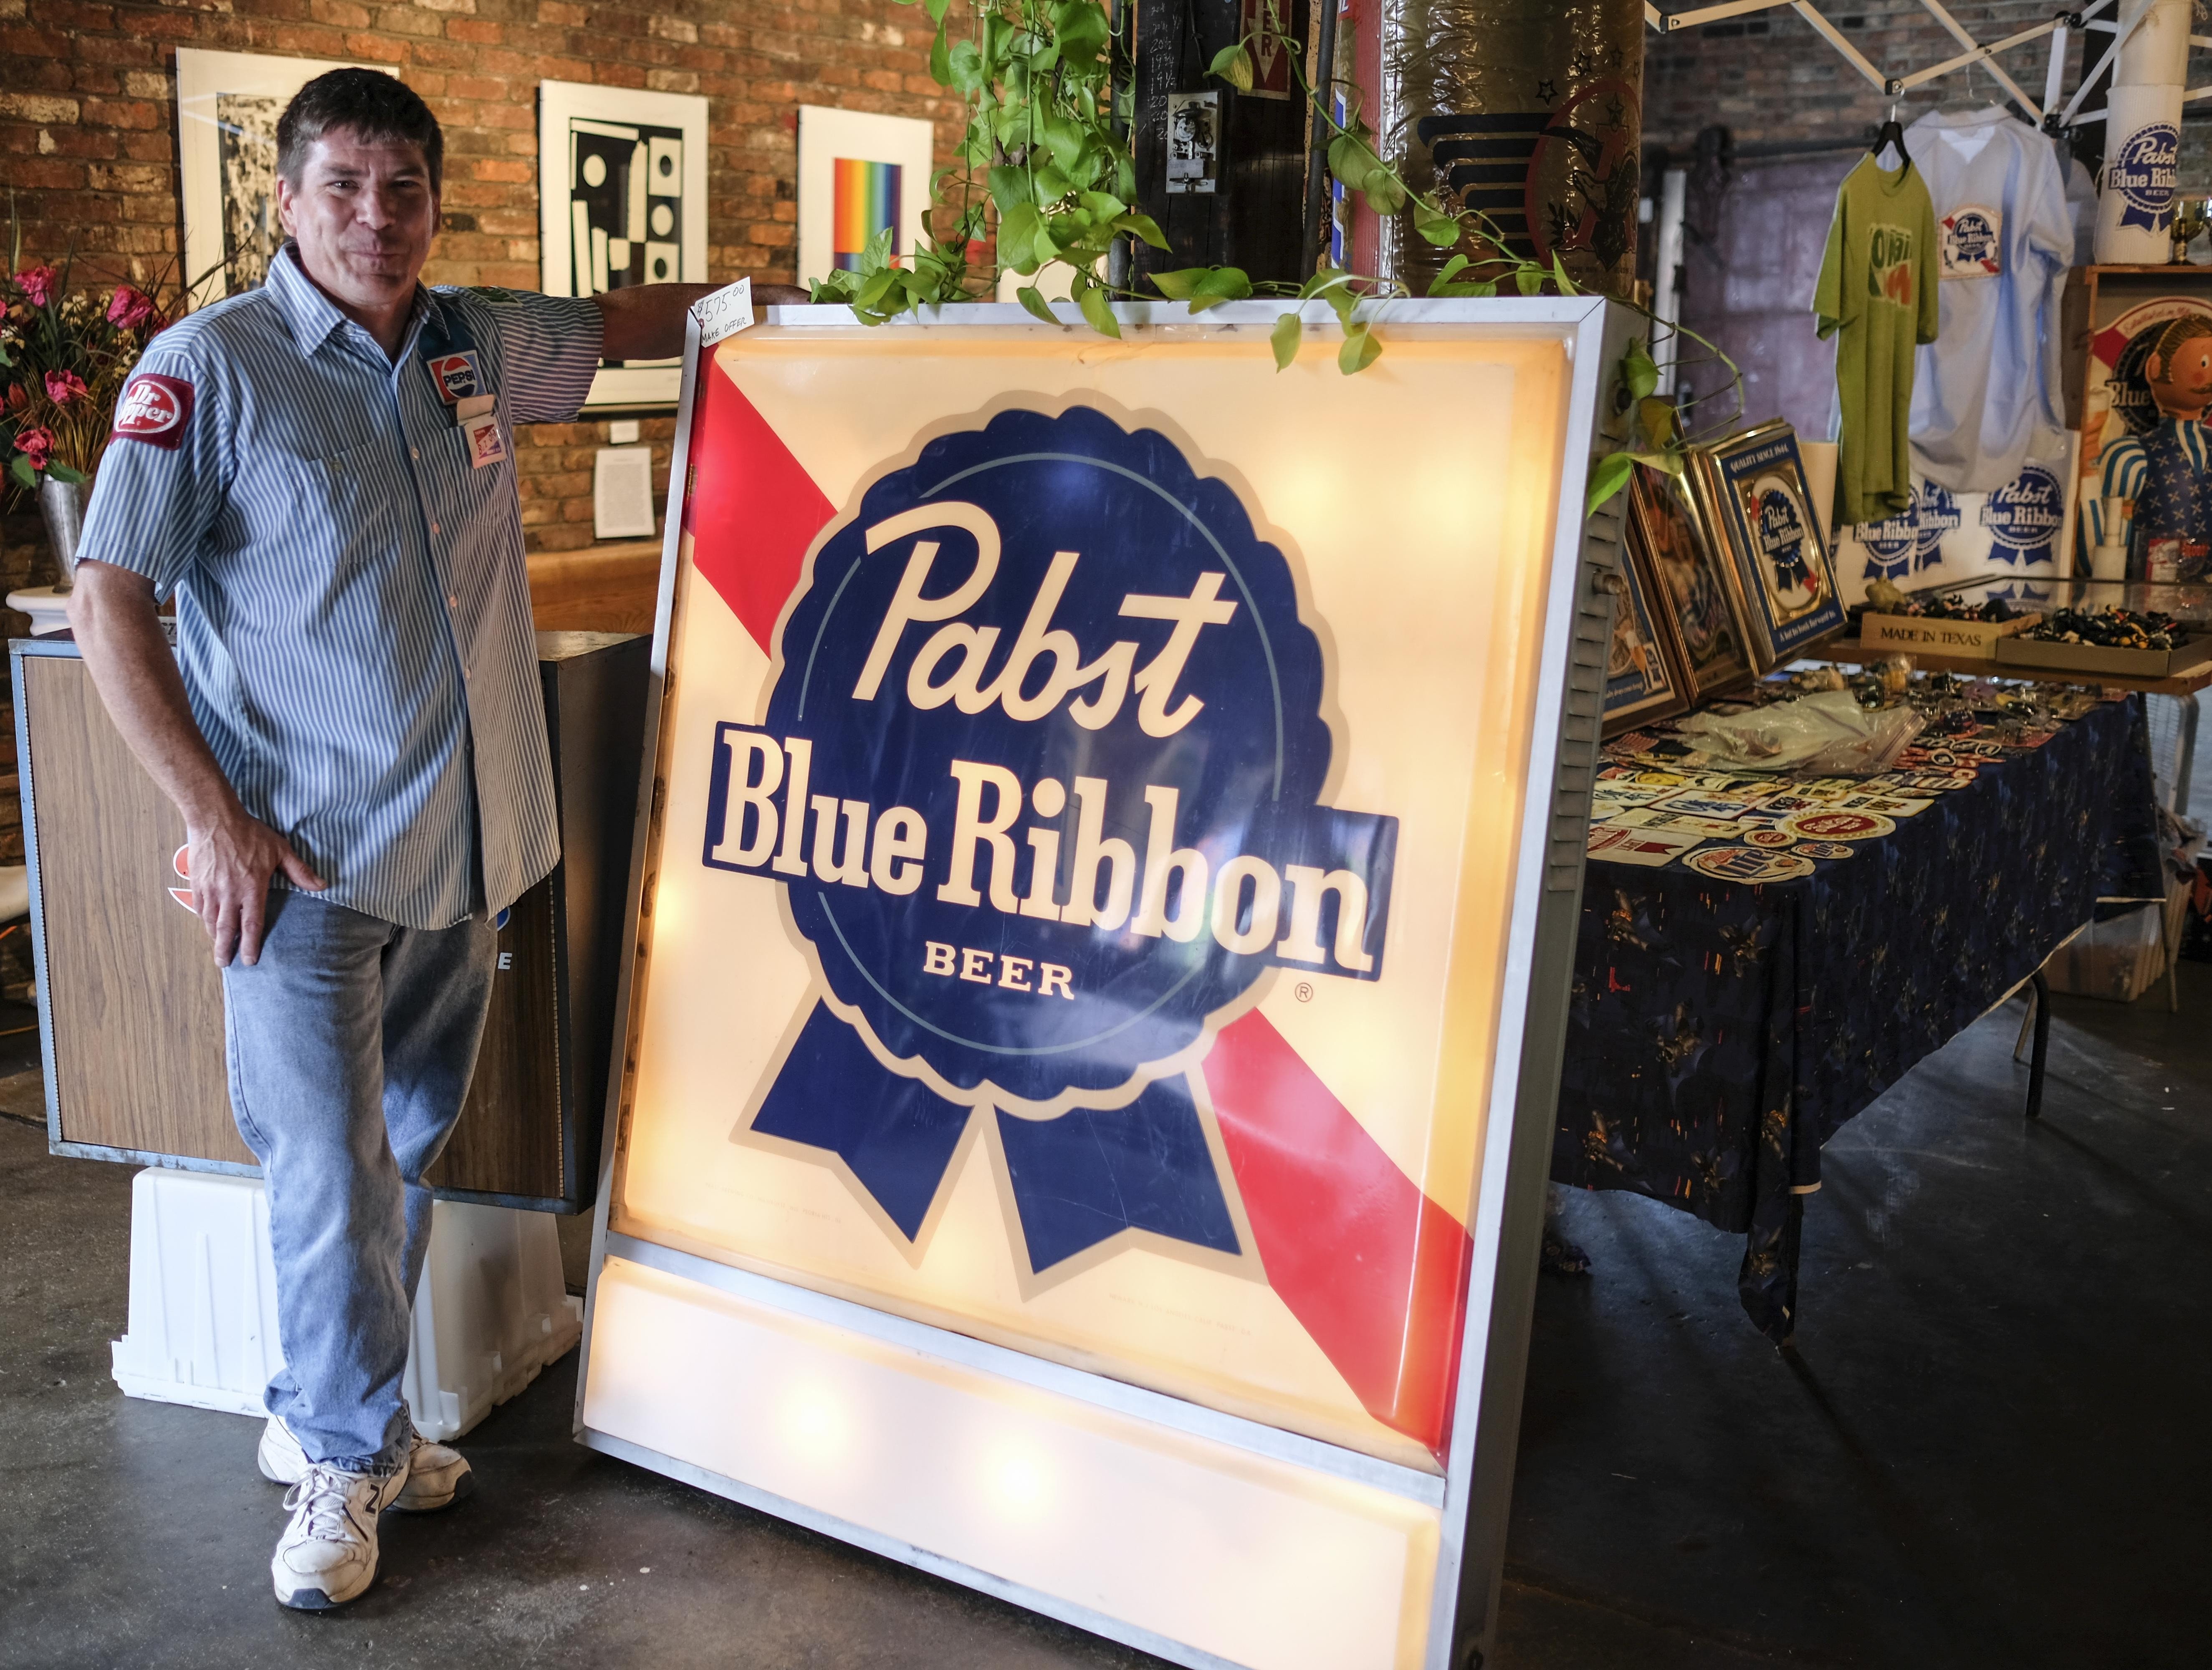 Derrin Pickett of Evansville, Indiana poses beside his large Pabst Blue Ribbon Beer sign next to his display tables at the Beatersville Car and Bike Show.  Pickett says that he sets up about four or five times a year at different car shows with his beer and car memorabilia. &#147;I kinda dig on it. I used to be all toys, like the hot-wheels, action figures and stuff.  I did this show back in 09&#146; and the guy next to me was selling all of this cool beer stuff. I see that stuff all the time at garage sales and good will, and I just didn't know there was a market for it.  But it&#146;s this young hipster crowd.&#148;